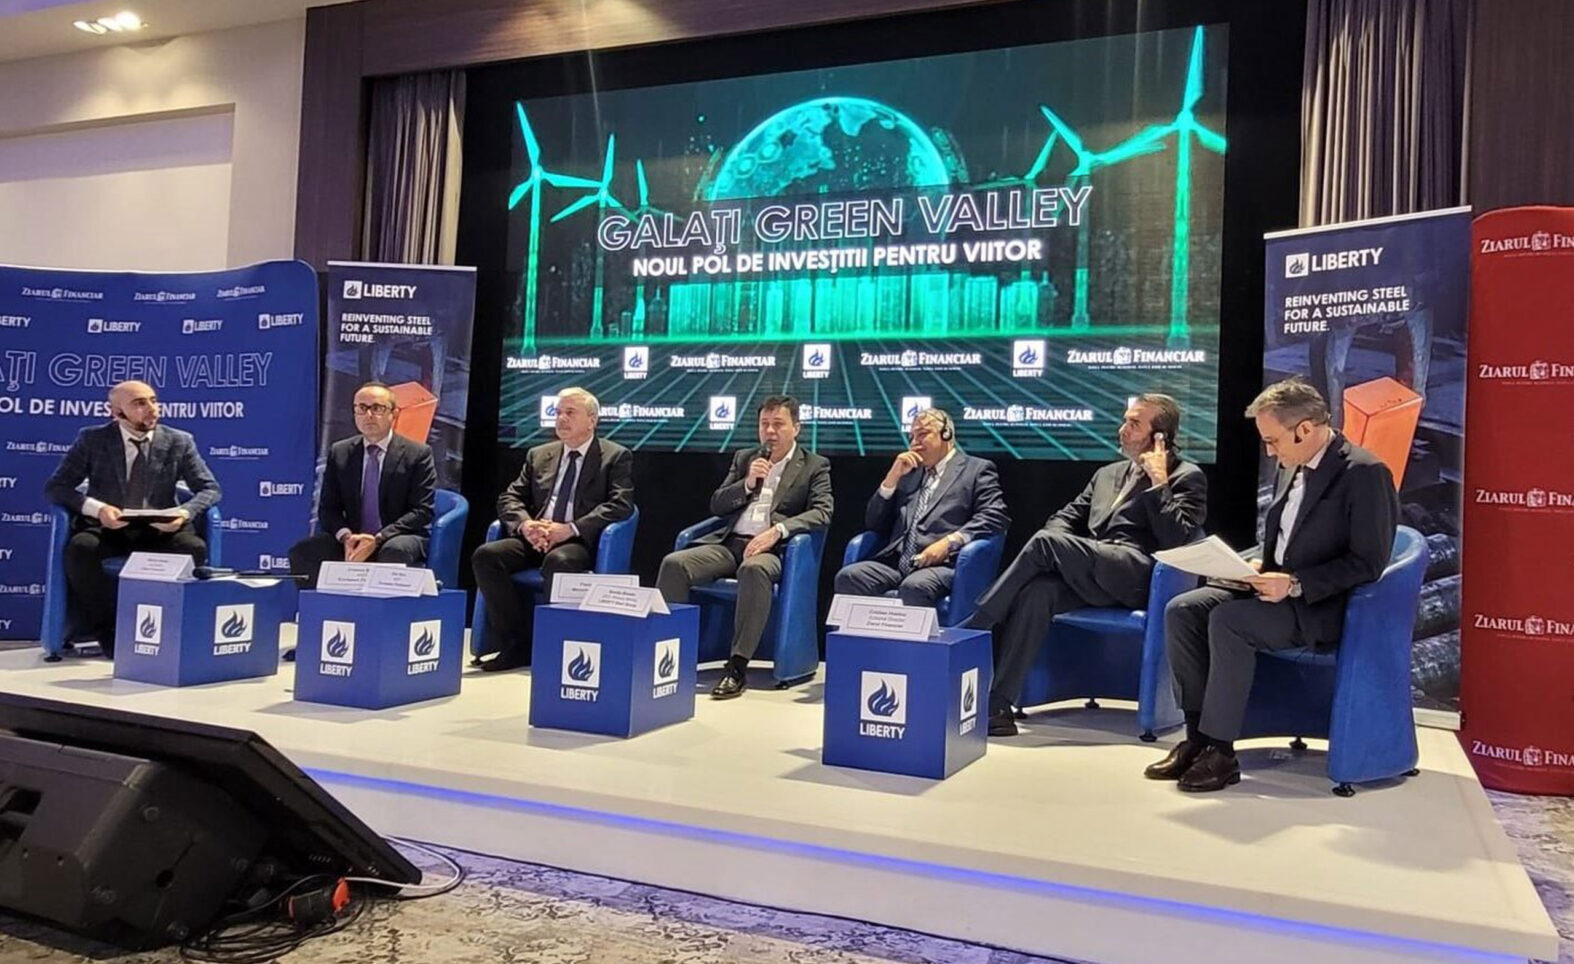 LIBERTY Galati hosts major conference to promote its city as Romania’s first hydrogen hub